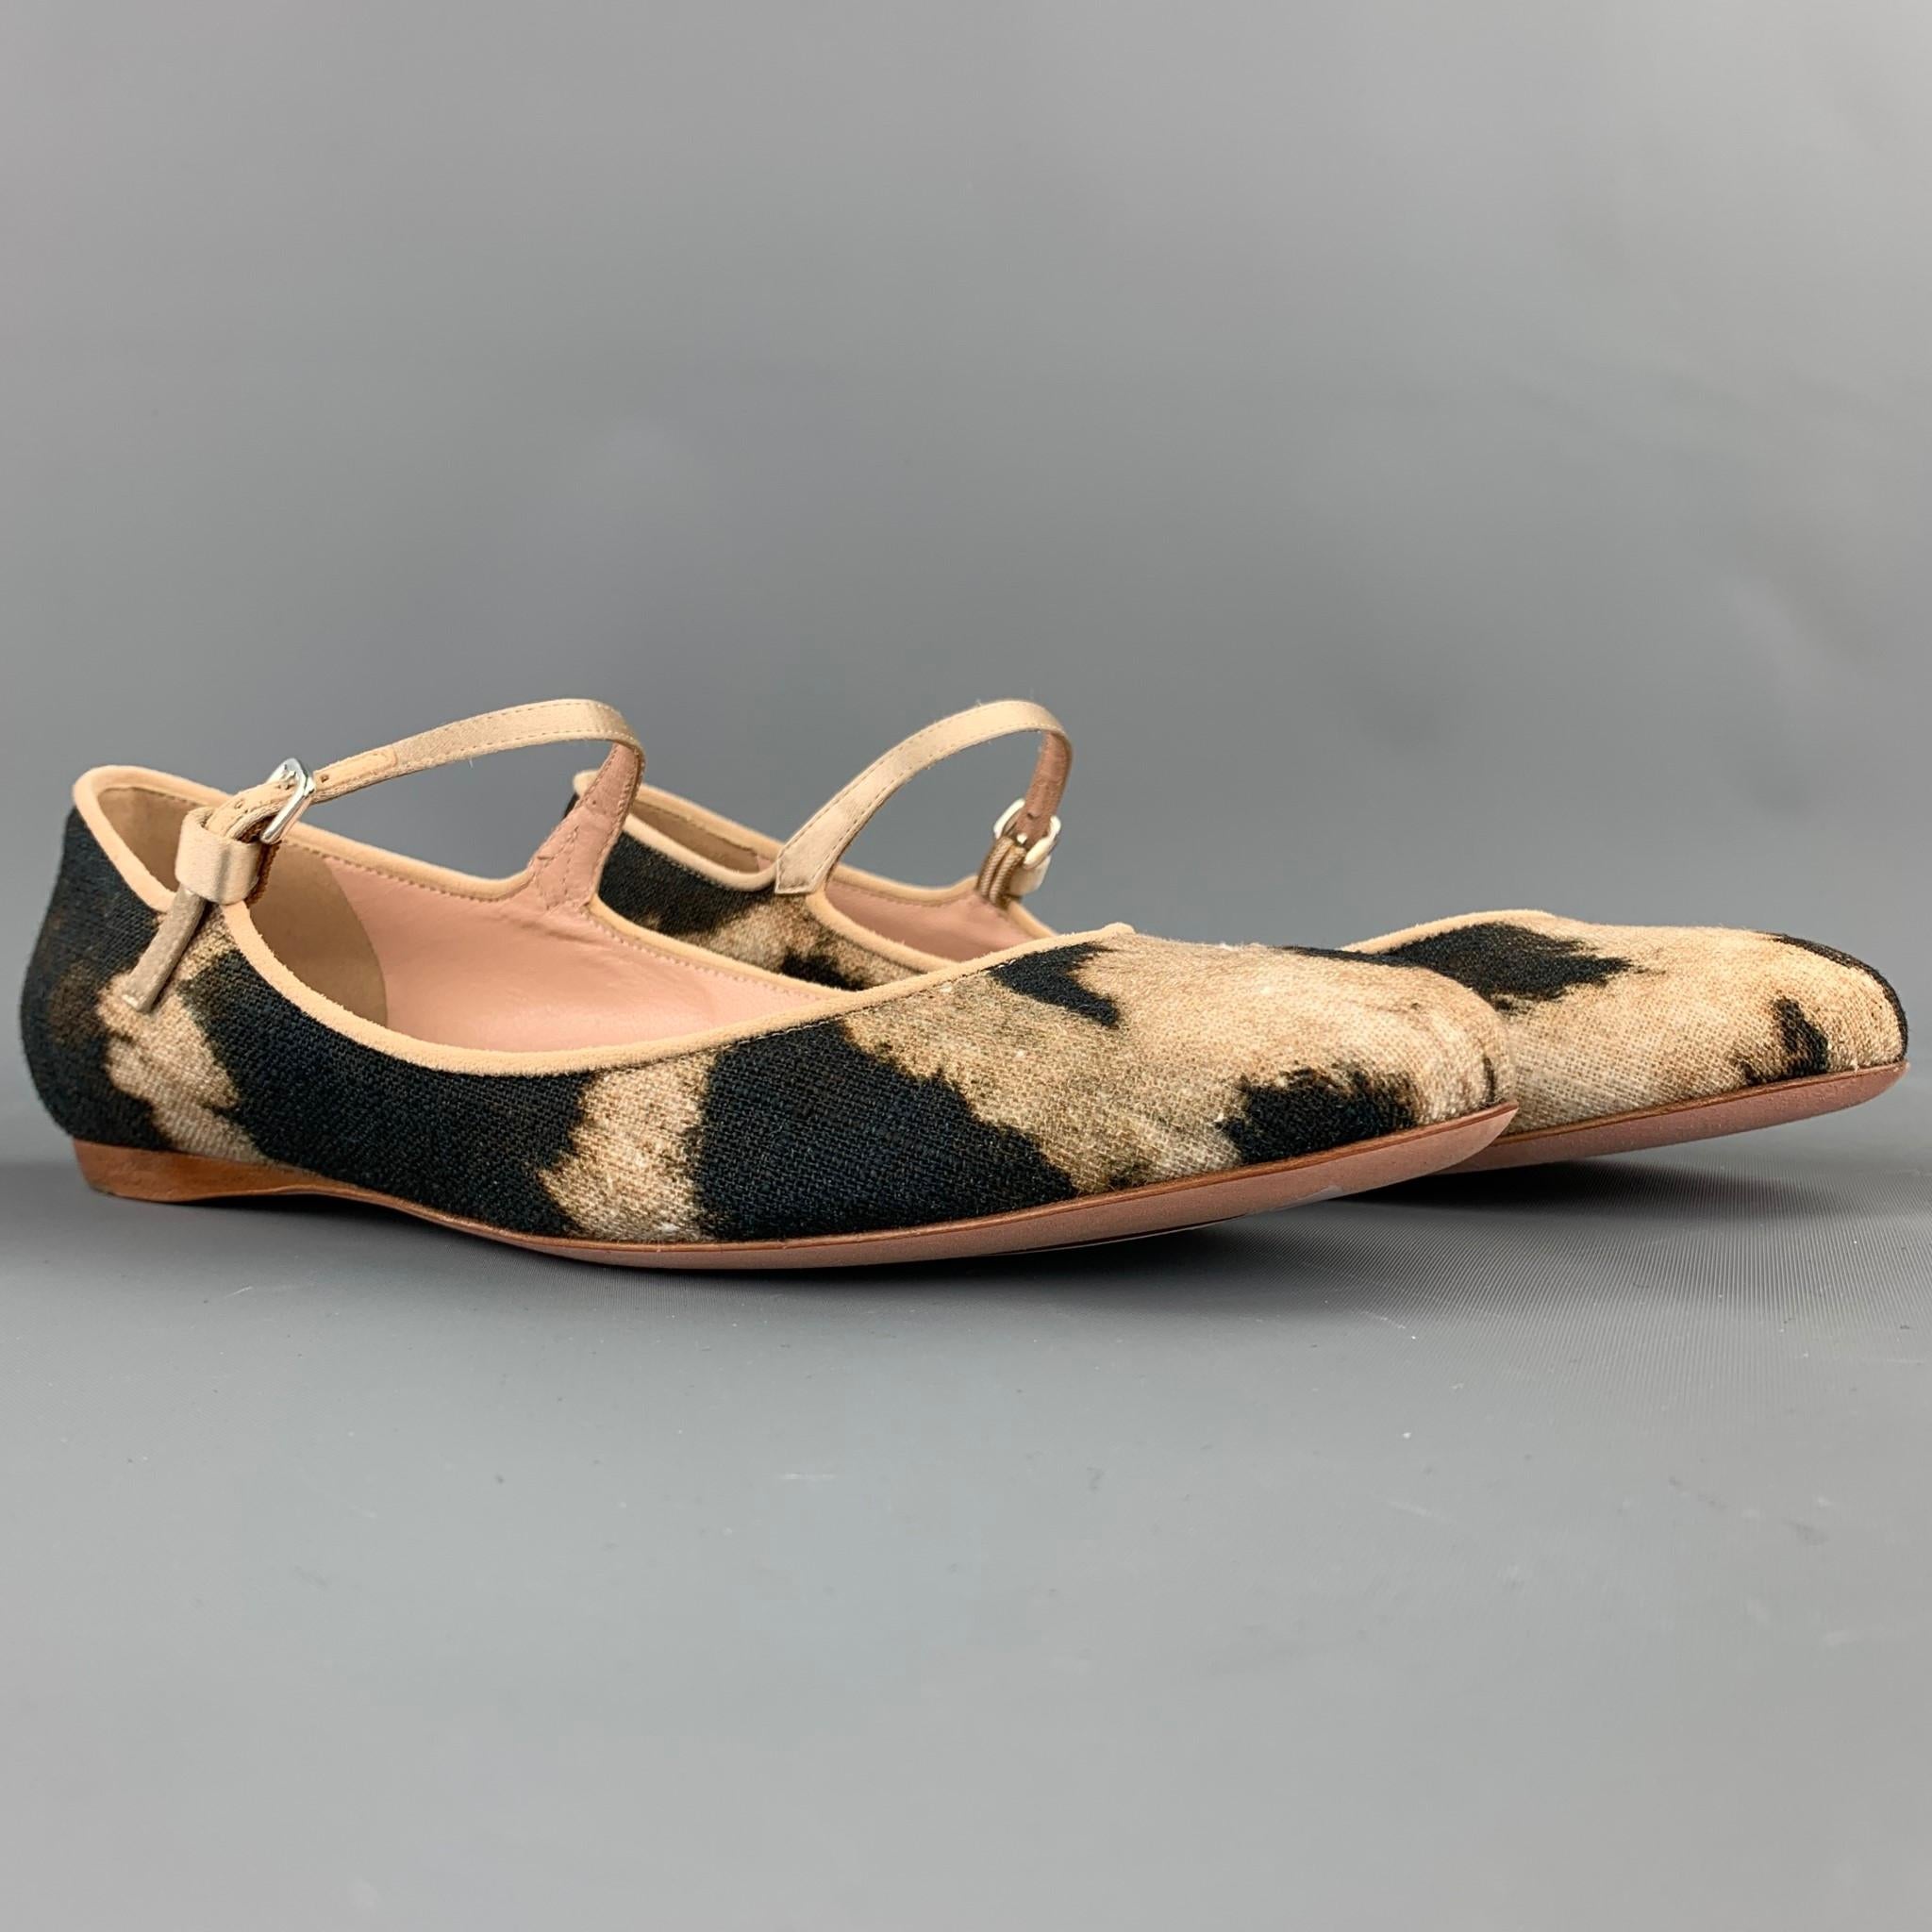 GIAMBATTISTA VALLI flats comes in a beige & brown leopard print material featuring a maryjane style and a strap closure. Comes with box. Made in Italy.

Very Good Pre-Owned Condition.
Marked: EU 37.5

Measurements: 9.5 in. x 2.5 in.  